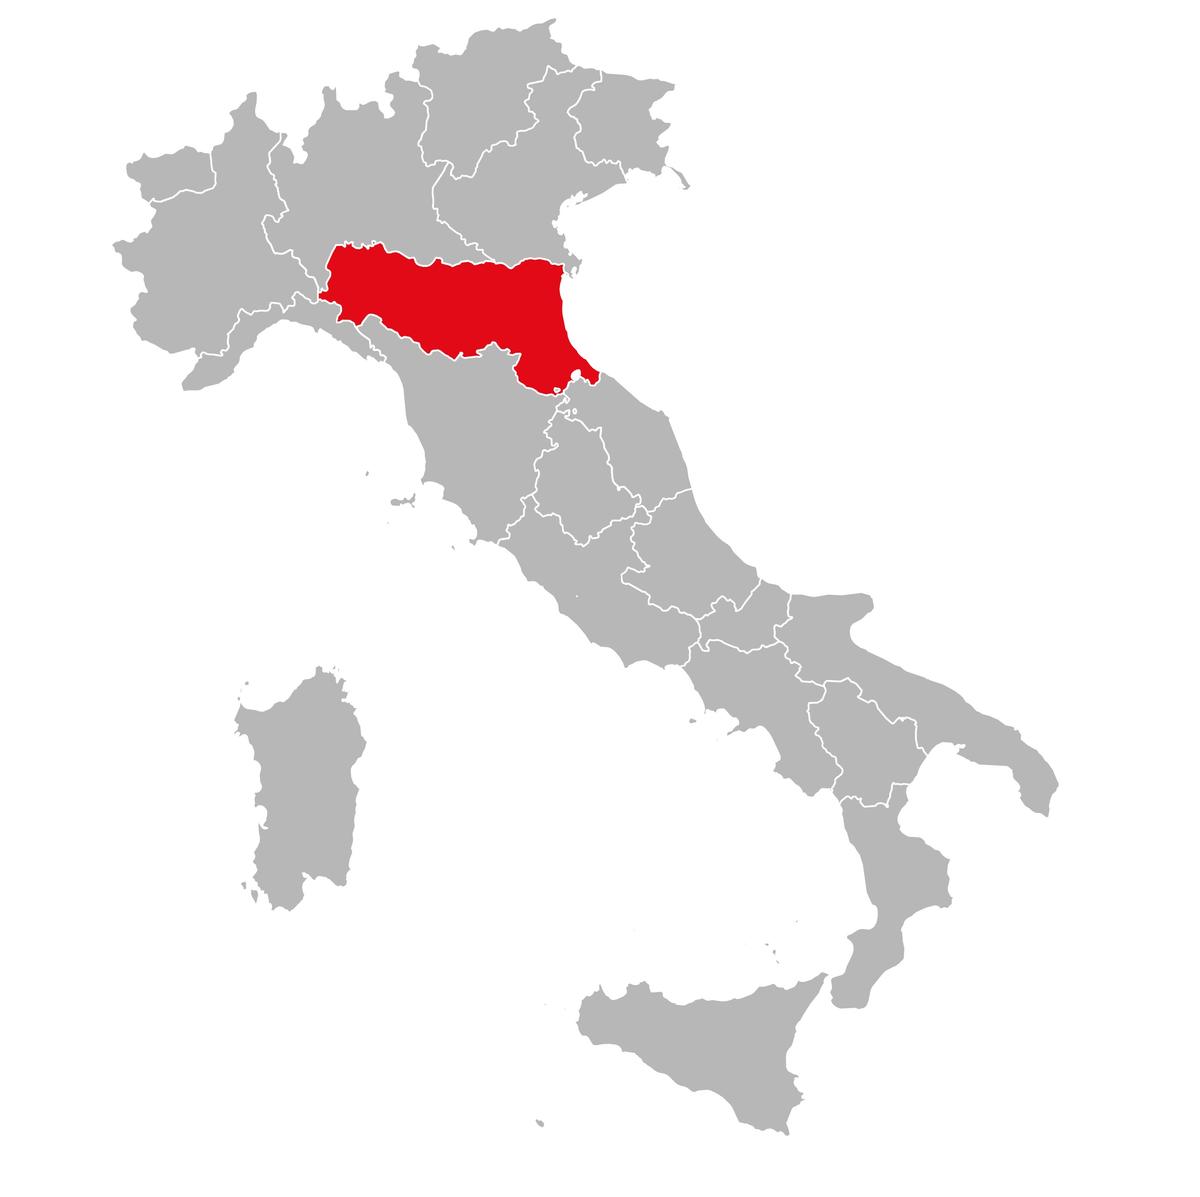 The Emilia-Romagna region begins just southeast of Milan and the Lombardy region and runs across the northern edge of Tuscany, all the way to the Adriatic Sea. (infinetsoft/Shutterstock)